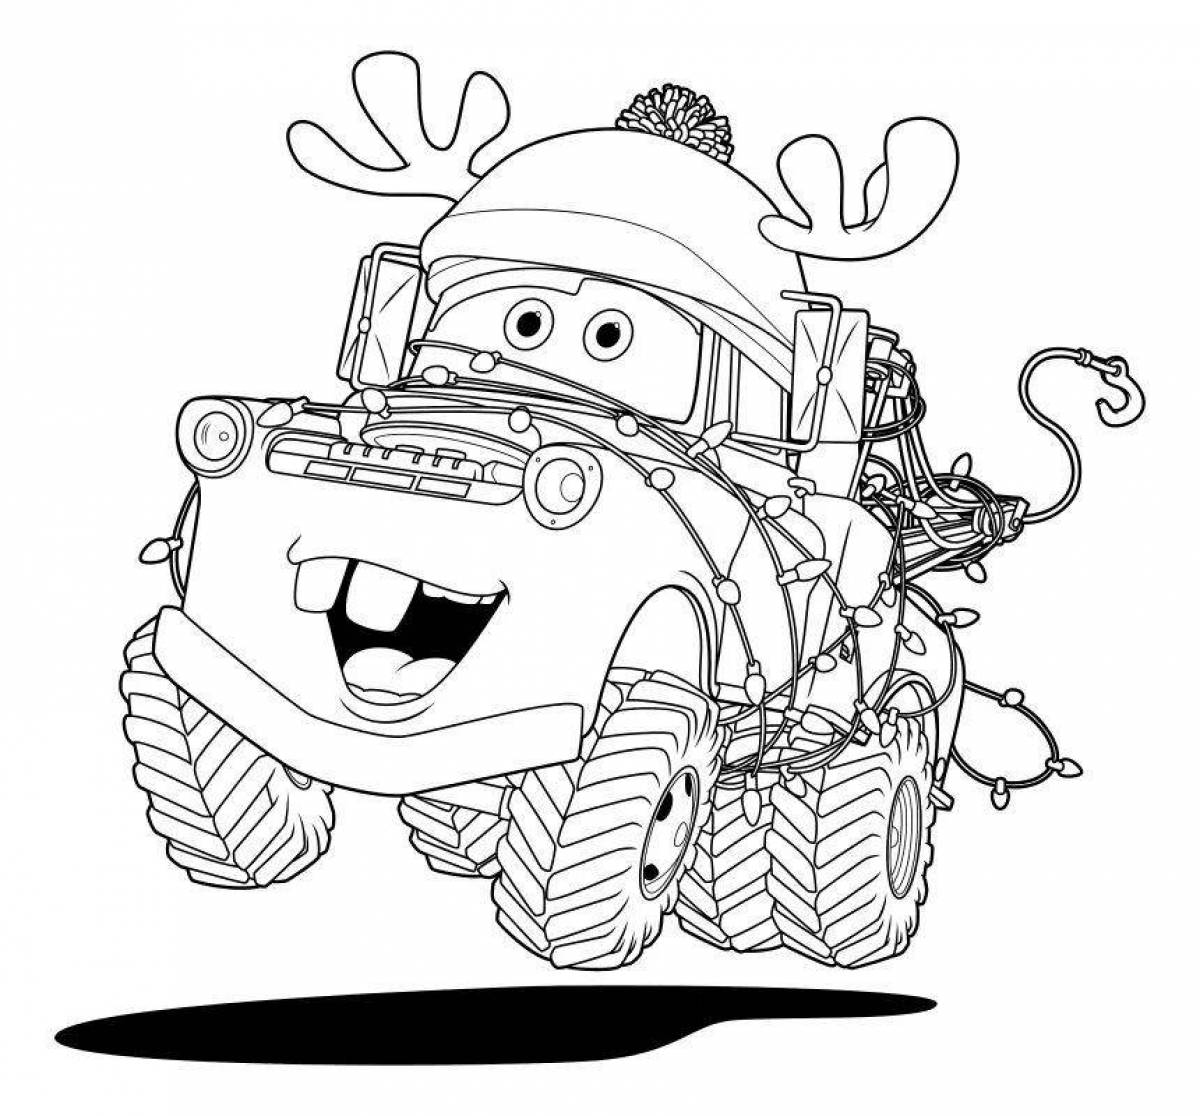 Merry Christmas car coloring